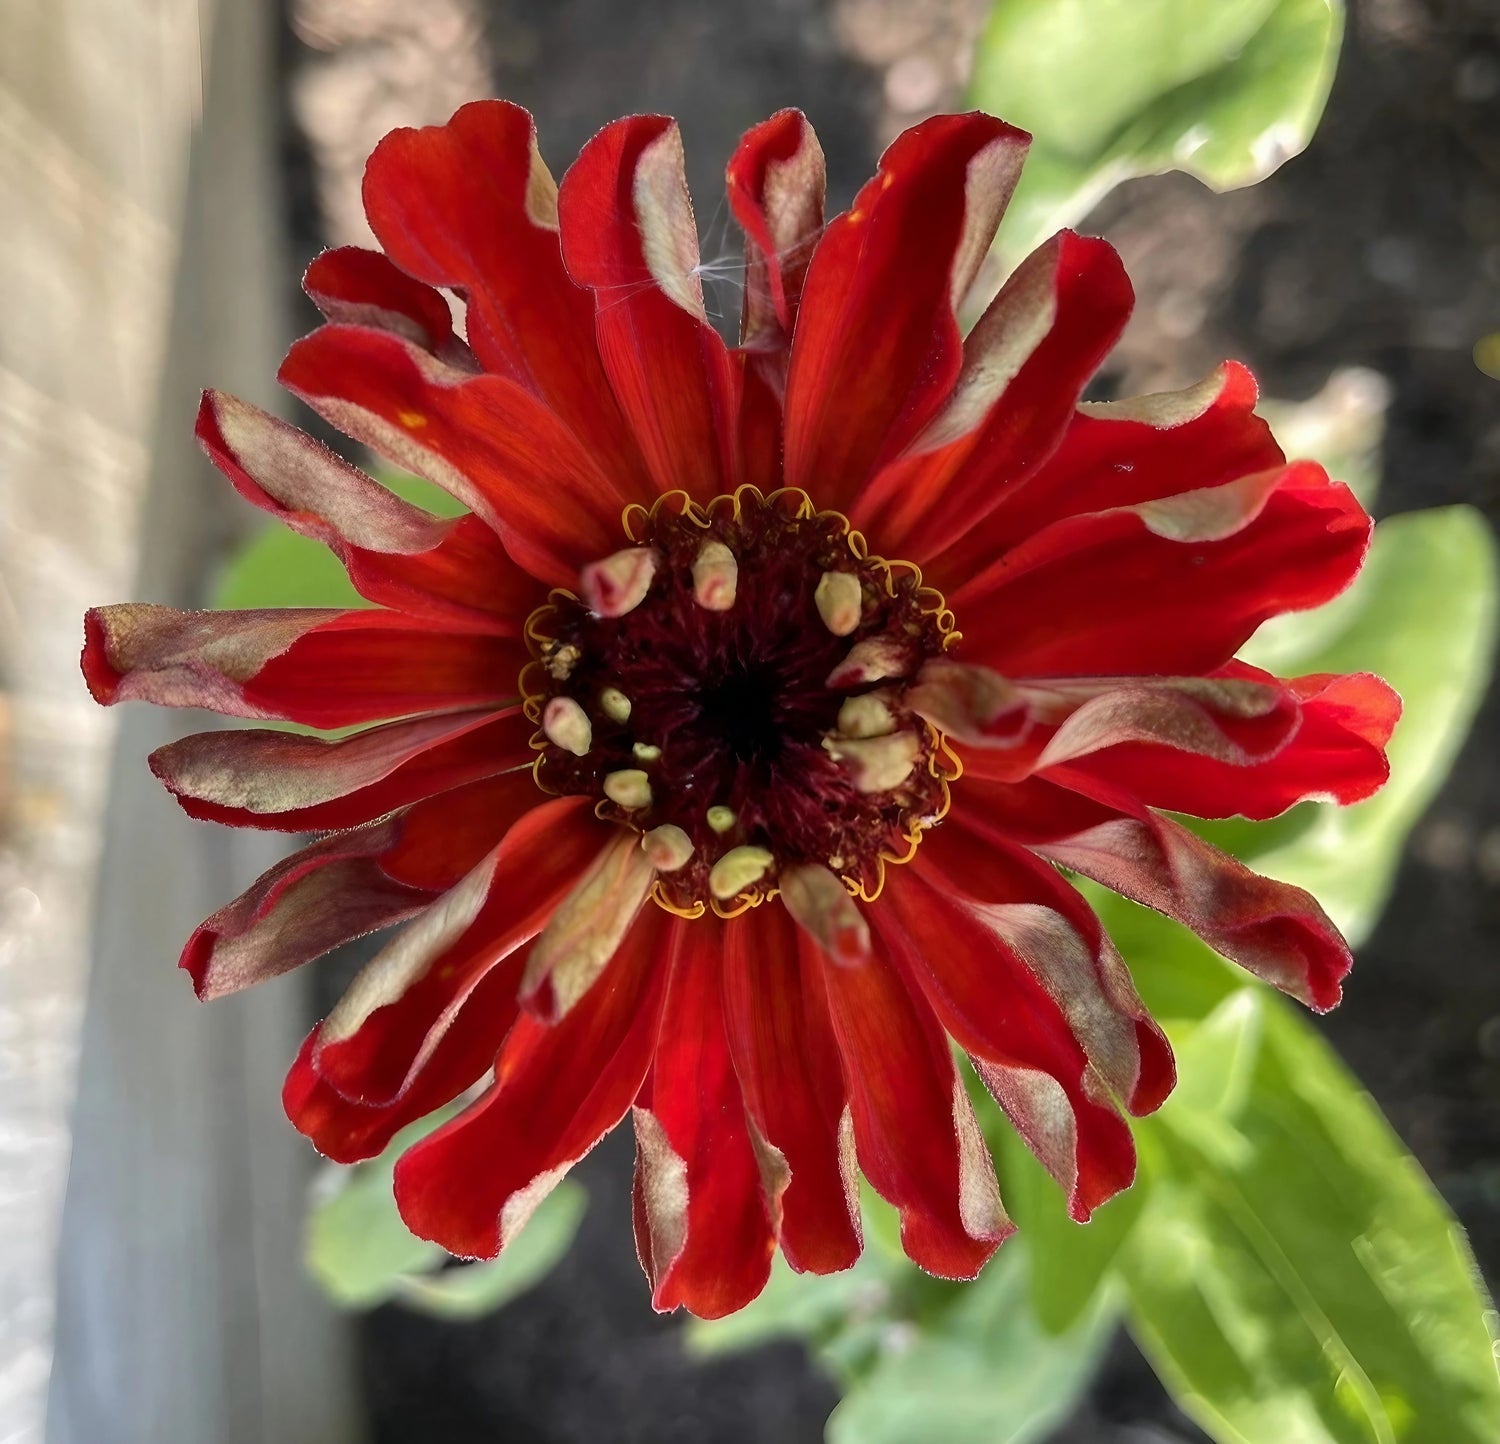 Unique Zinnia Giants of California bloom featuring red petals with distinctive white striping